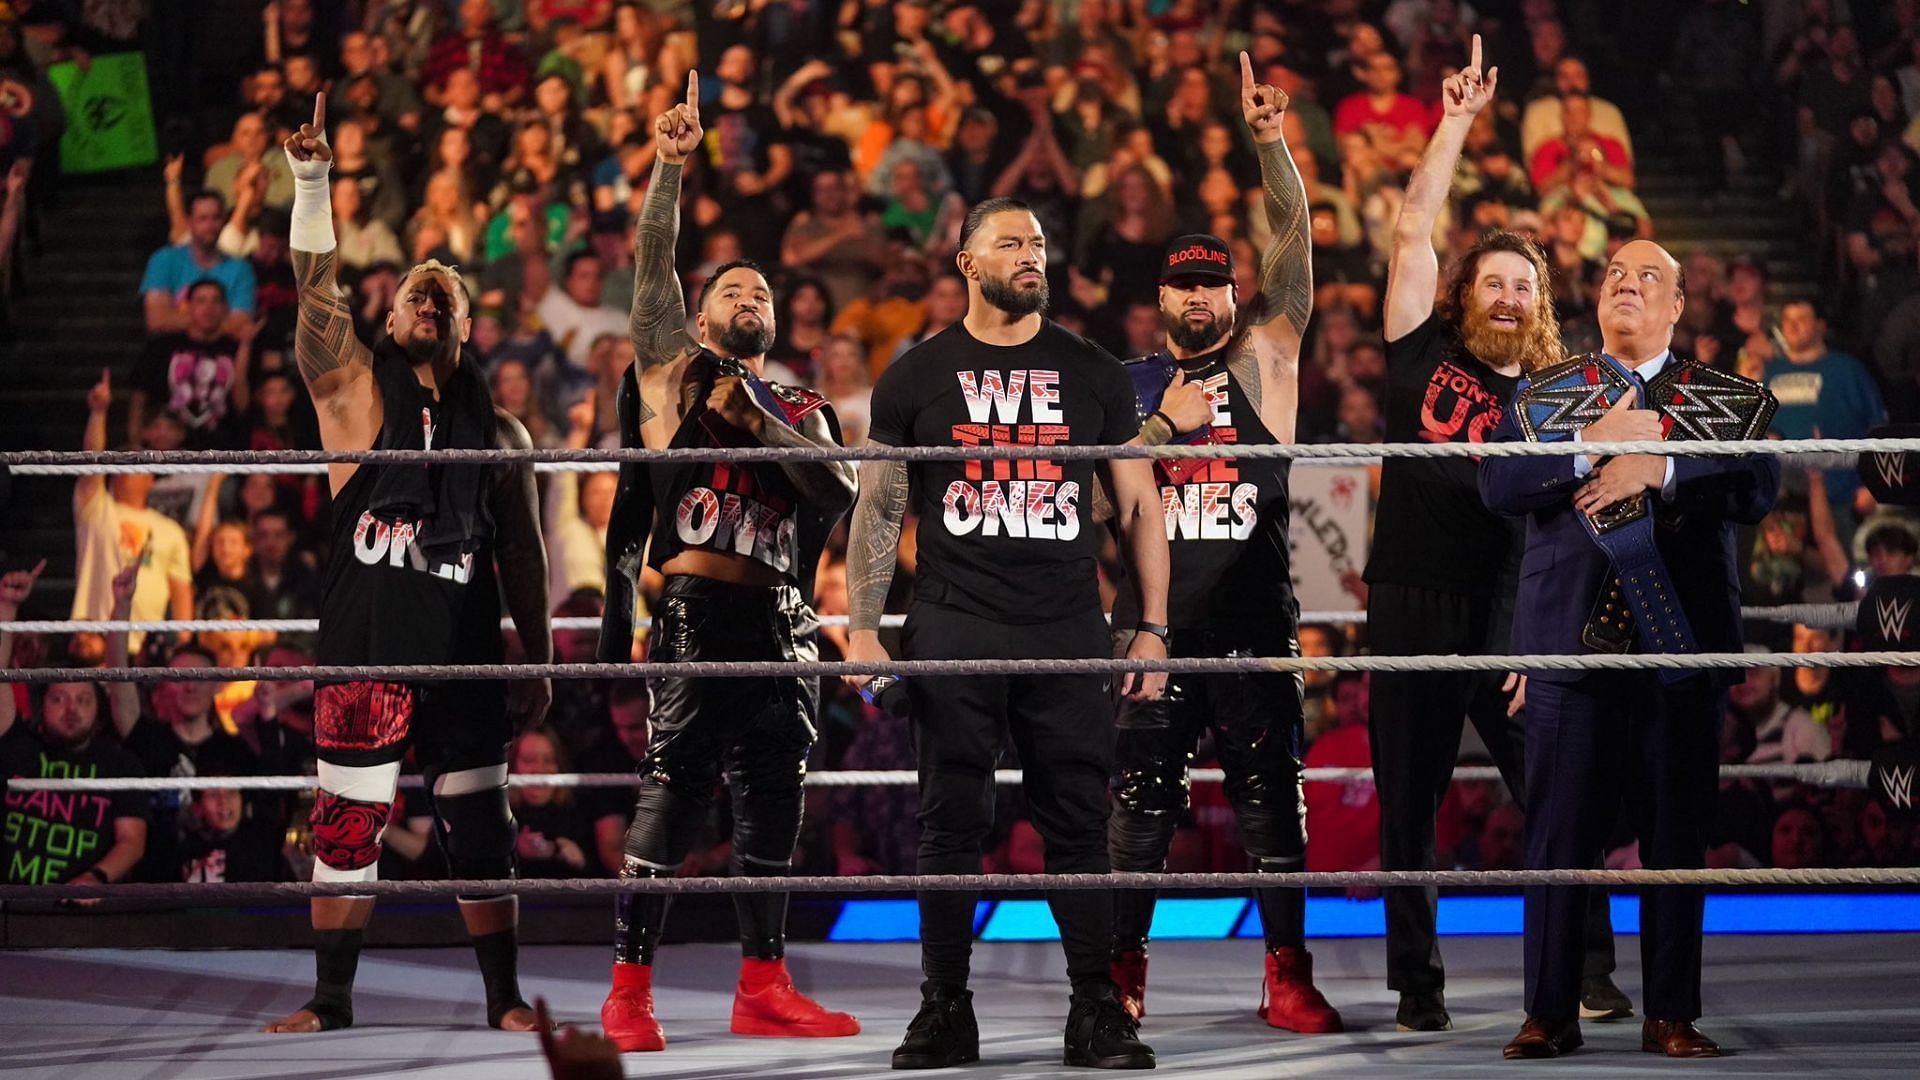 Debatably the most dominant faction in WWE history: The Bloodline